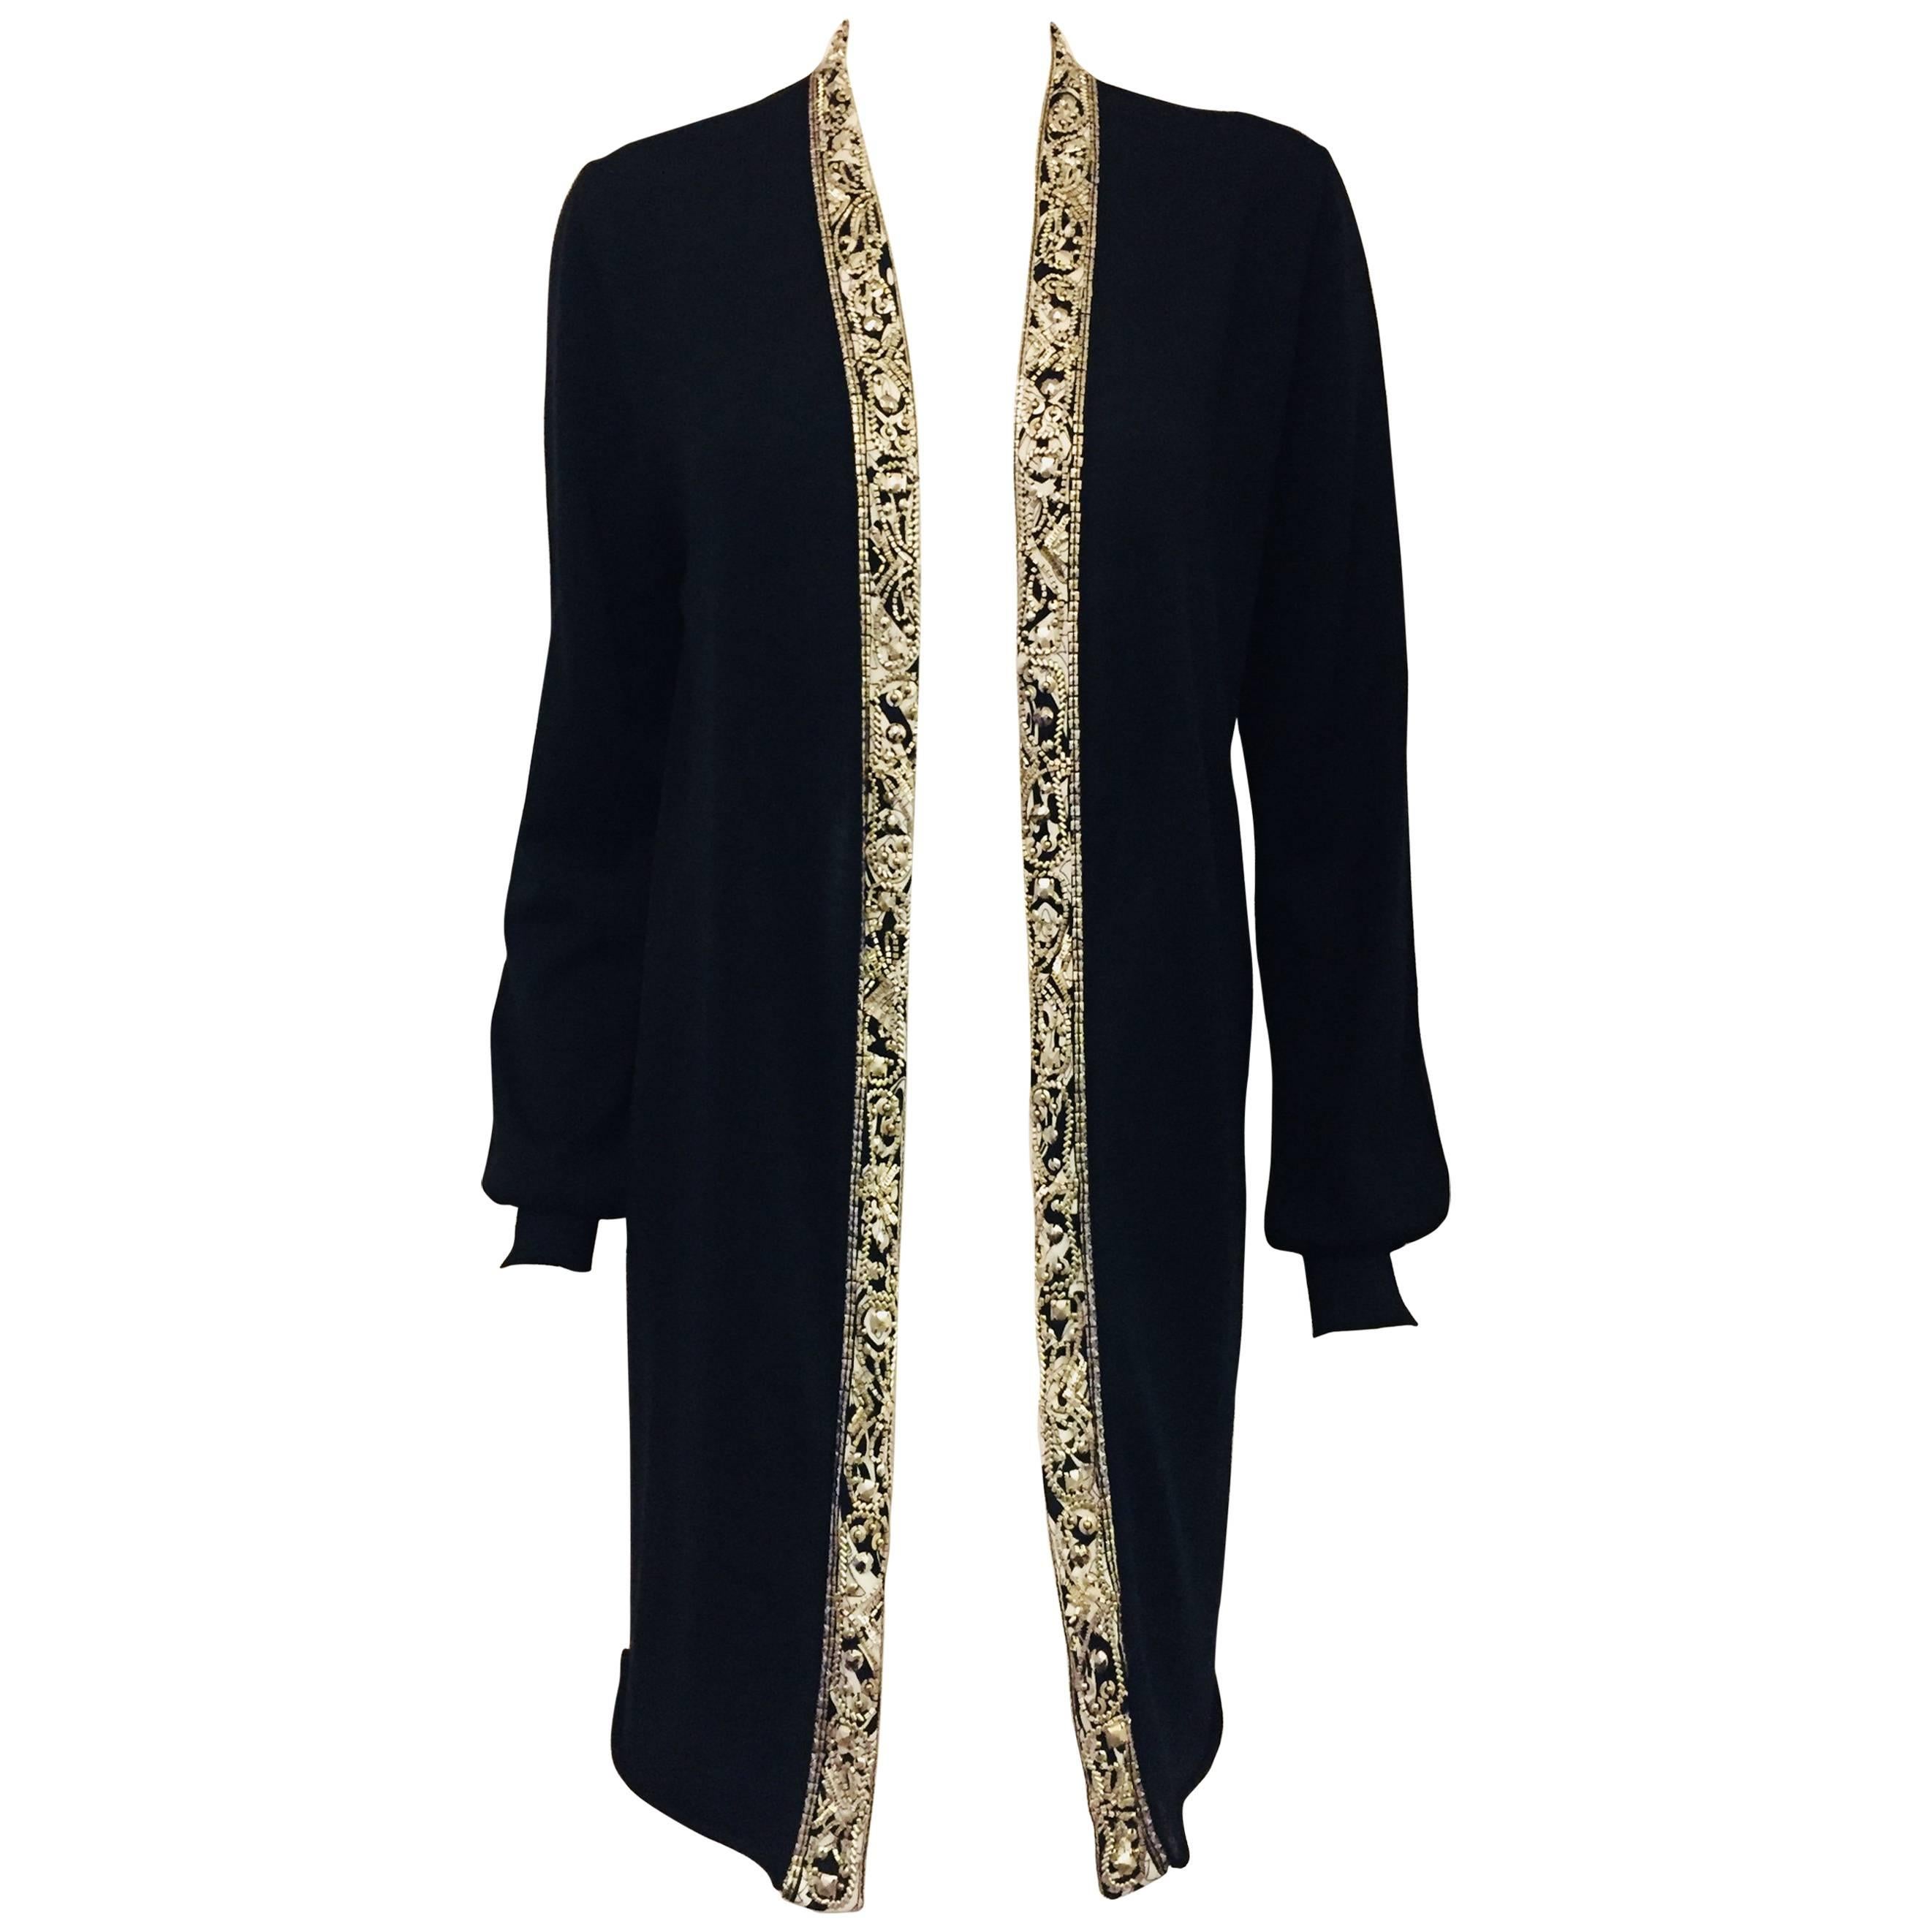 Emilio Pucci Black Wool with Silver Tone Beaded Decorated Open Jacket